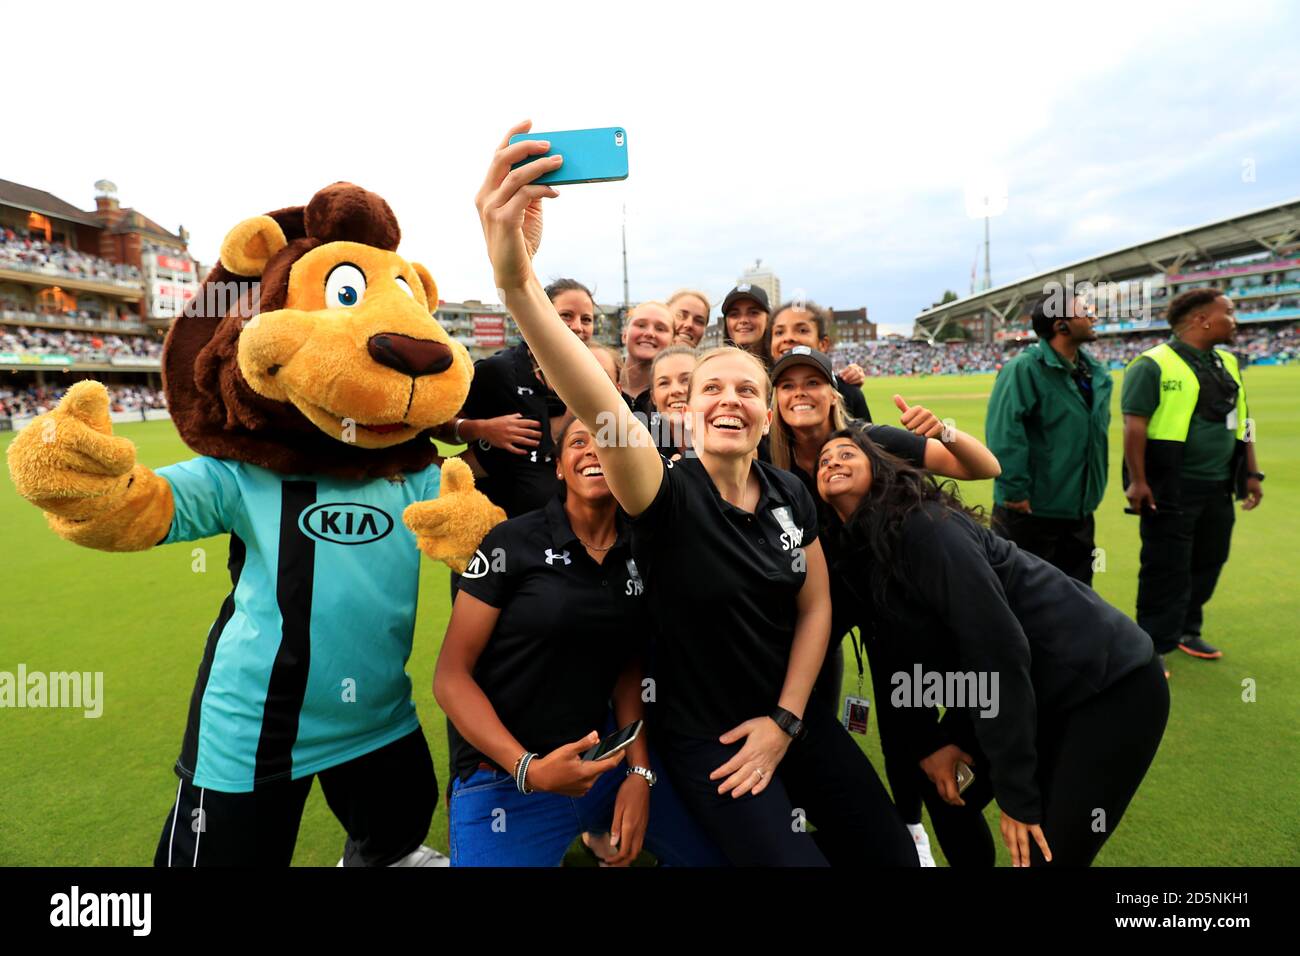 Promotional girls take a selfie on the pitch with Surrey mascot Caesar the Lion  Stock Photo